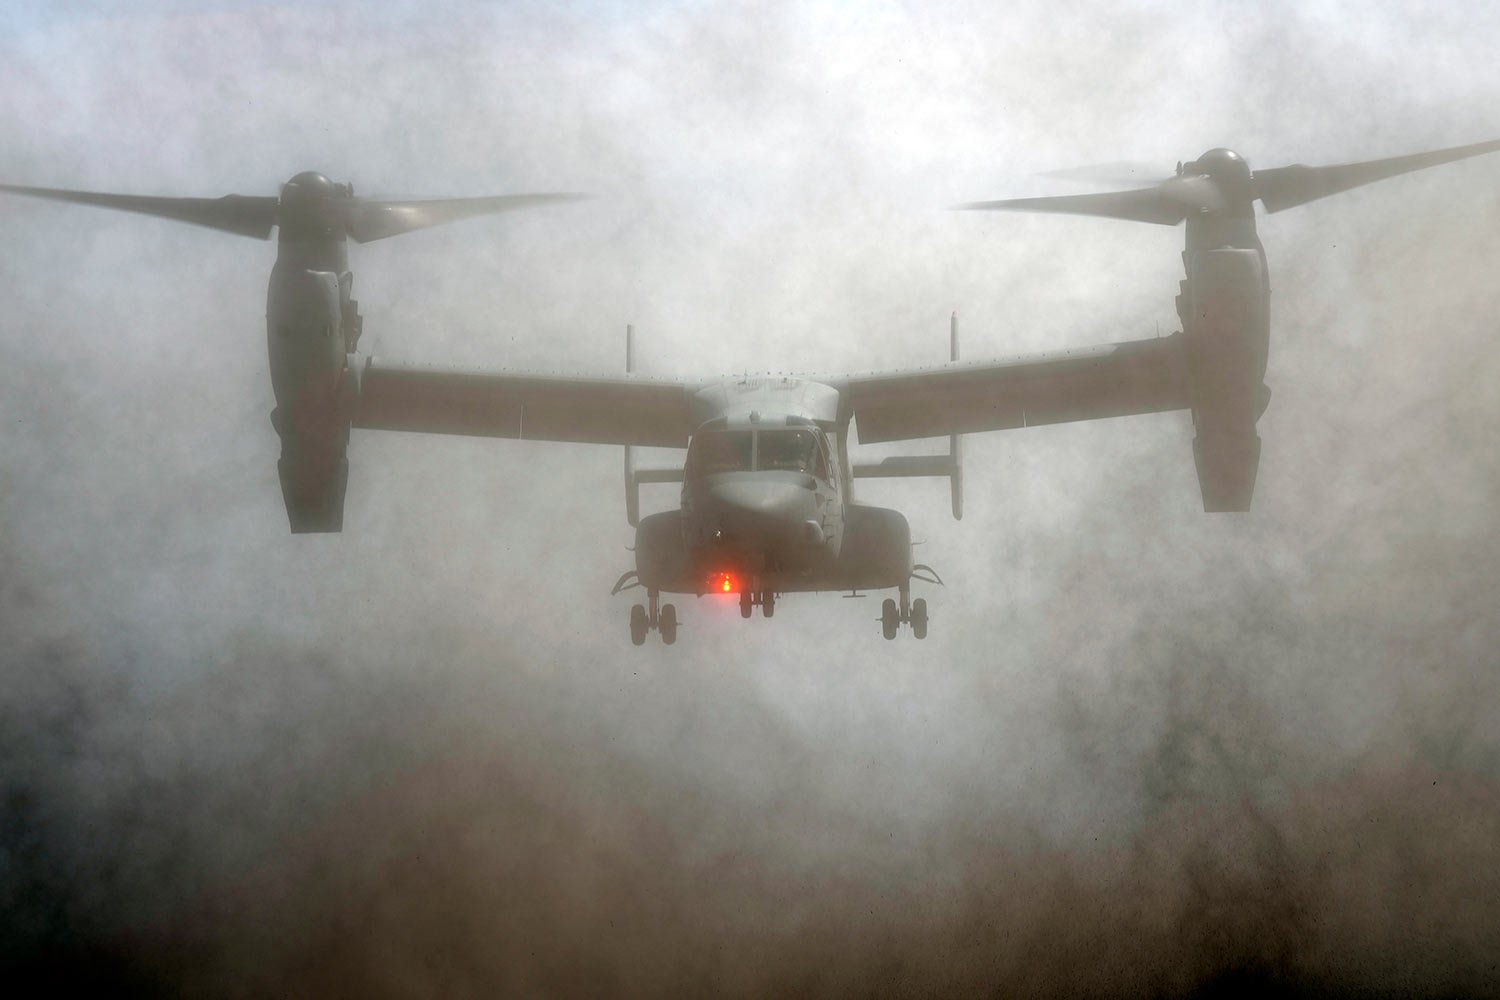  An MV-22 Osprey participates during a joint military helicopter borne operation drill between Japan Ground Self-Defense Force (JGSDF) and U.S. Marines at Higashi Fuji range in Gotemba, southwest of Tokyo, Tuesday, March 15, 2022. (AP Photo/Eugene Ho